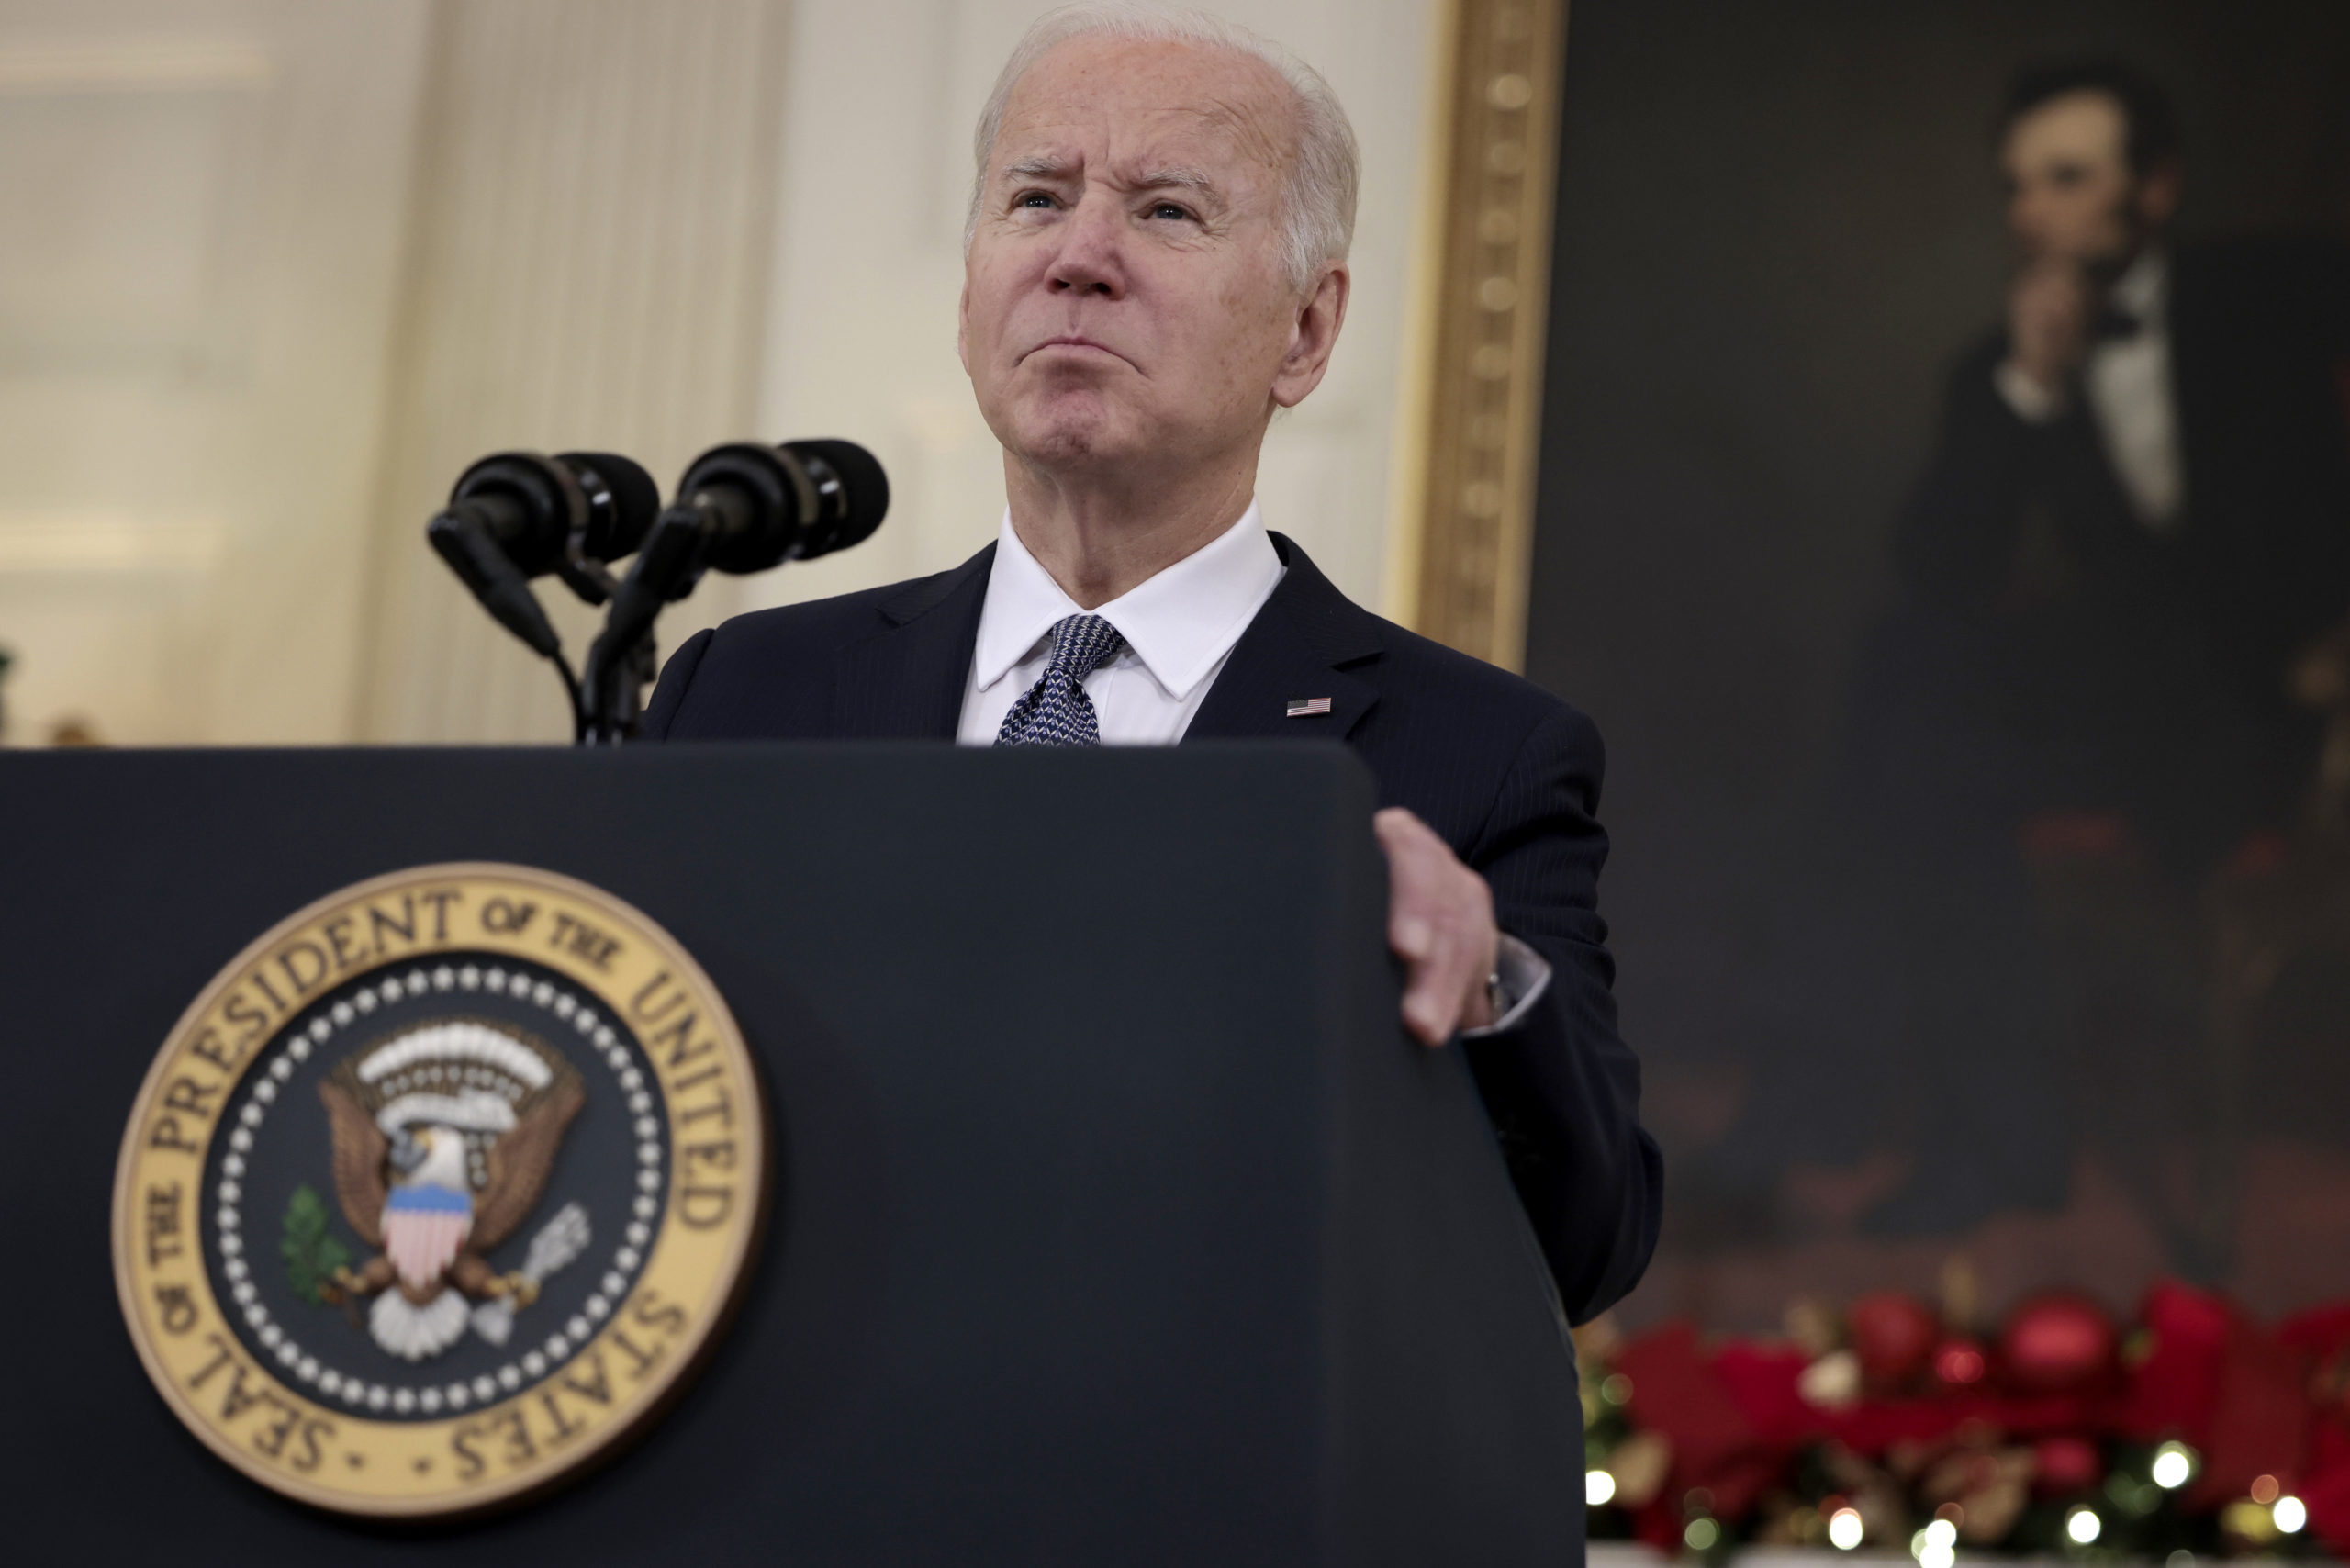 President Joe Biden delivers remarks at the White House on Friday. (Anna Moneymaker/Getty Images)